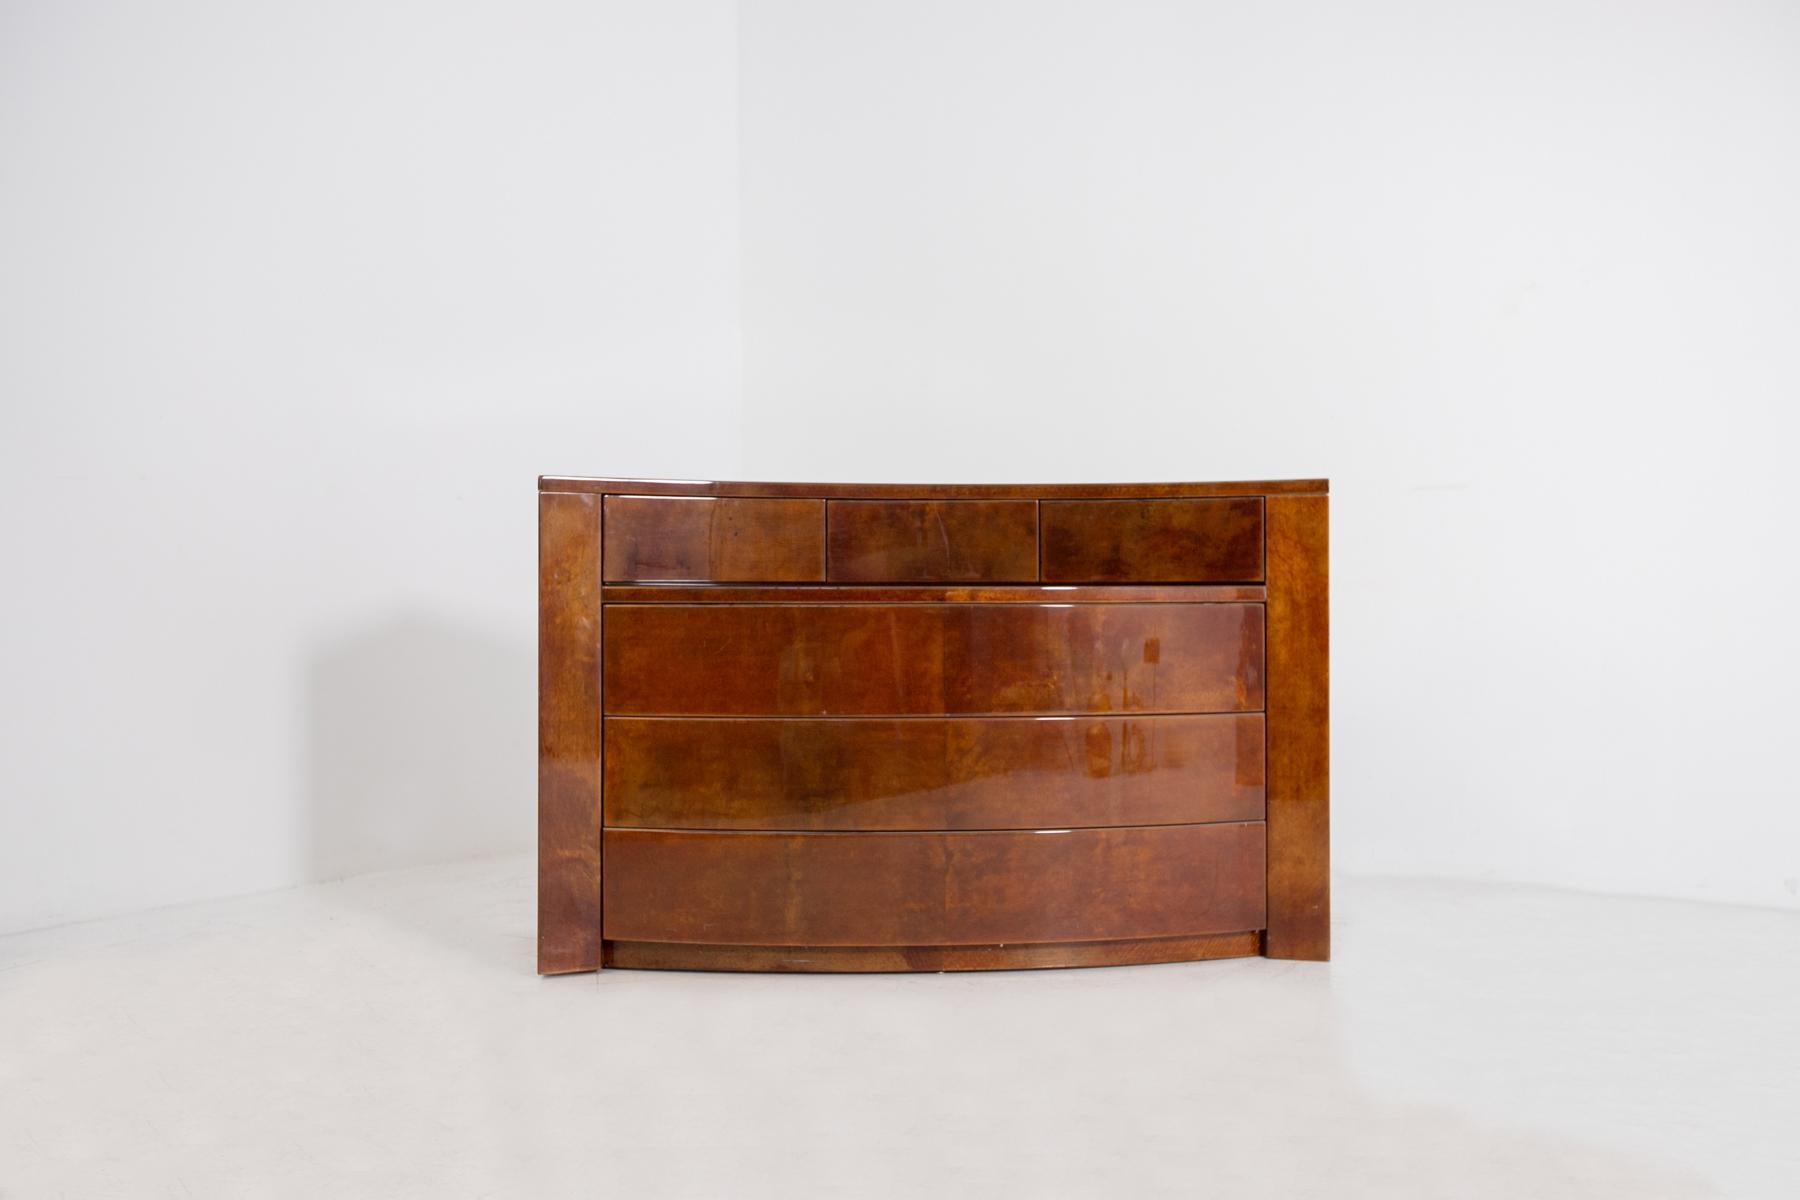 Elegant and valuable chest of drawers designed by Giorgio Tura in the 80's. The chest of drawers is also available as a small sideboard with drawers.
The dresser is finished in a precious parchment brown color with elegant and very beautiful